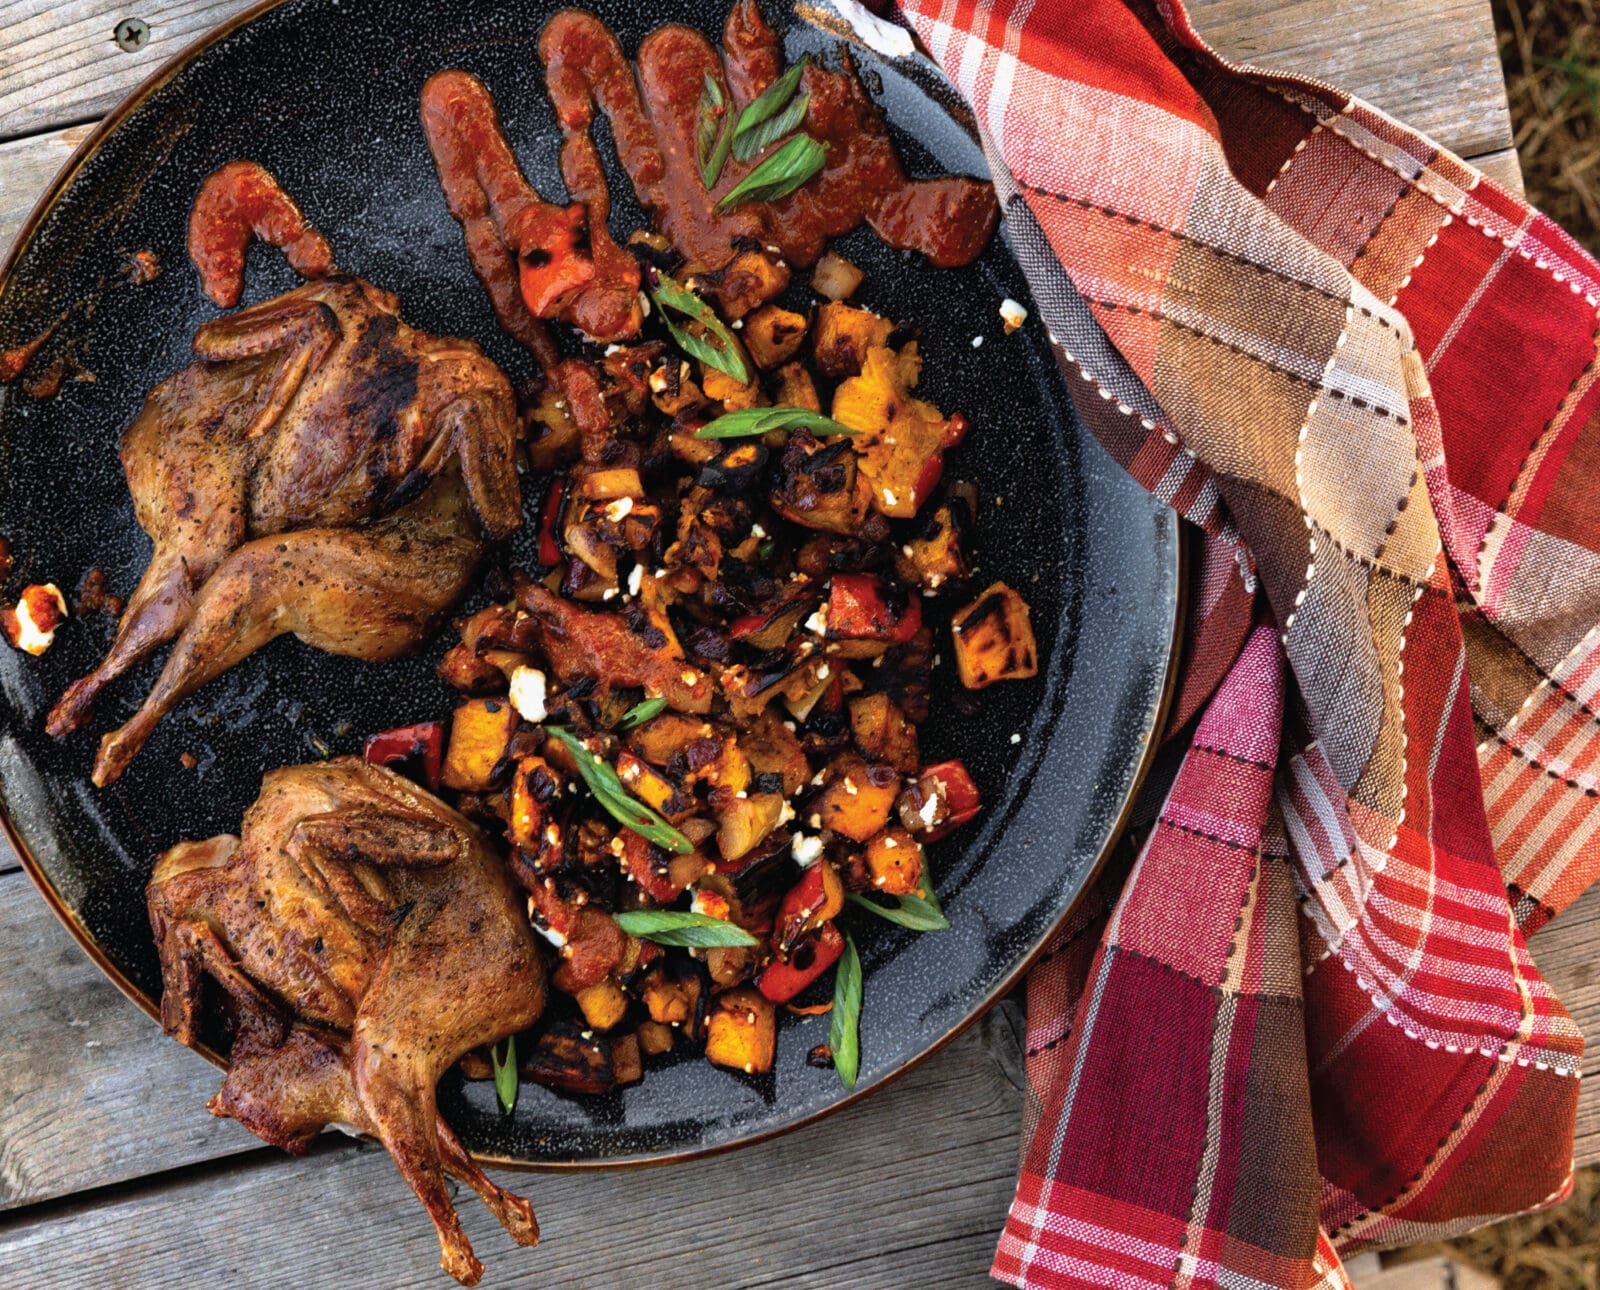 Grilled quail in a skillet with a pumpkin side dish